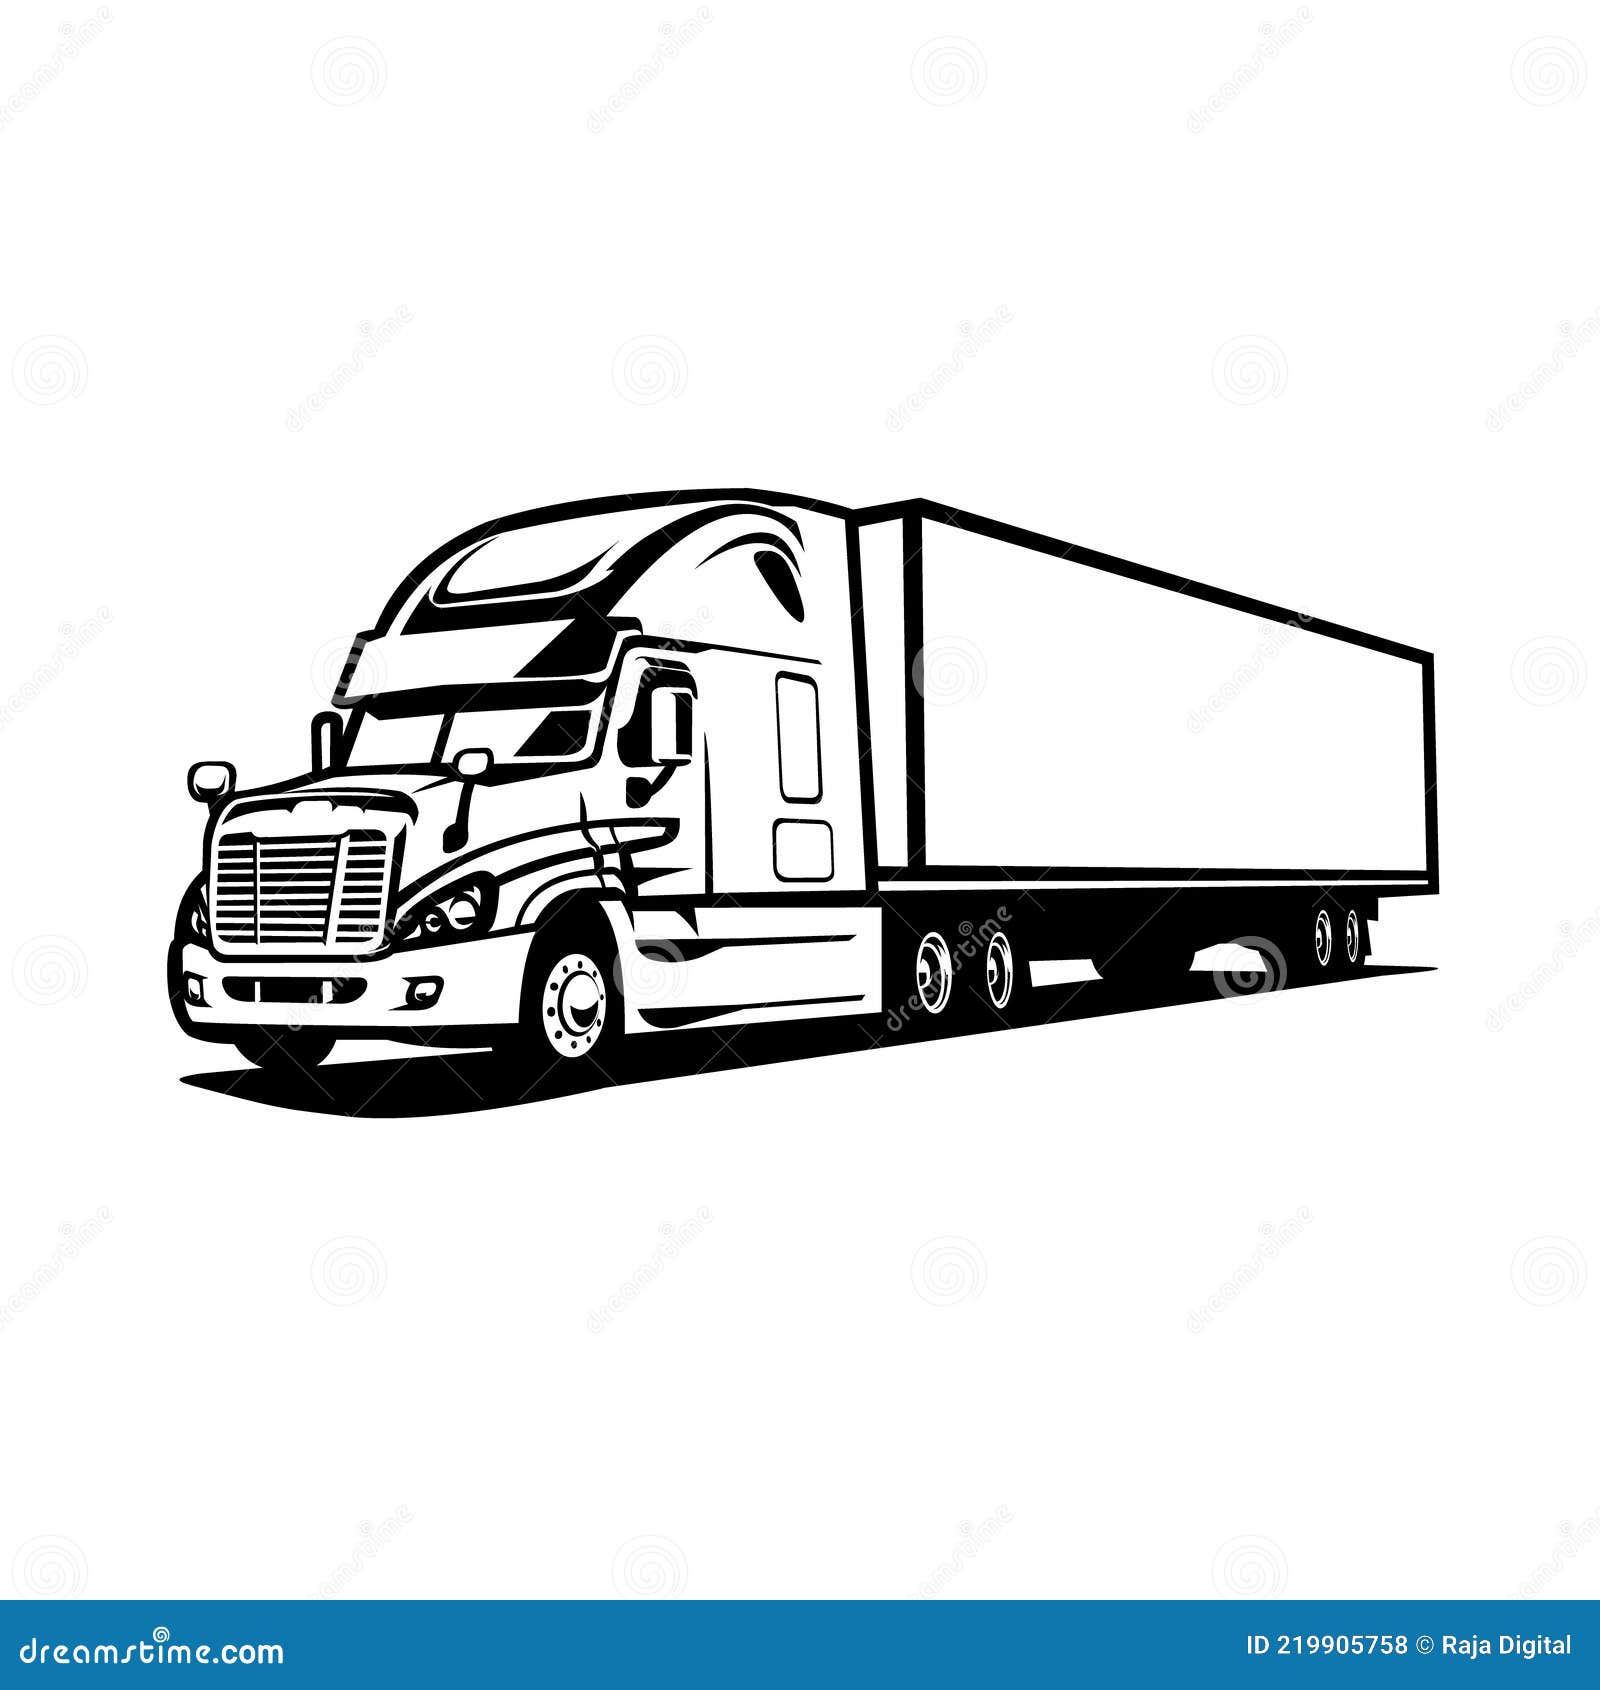 Silhouette Of Semi Truck 18 Wheeler With Trailer Side View Vector Image ...